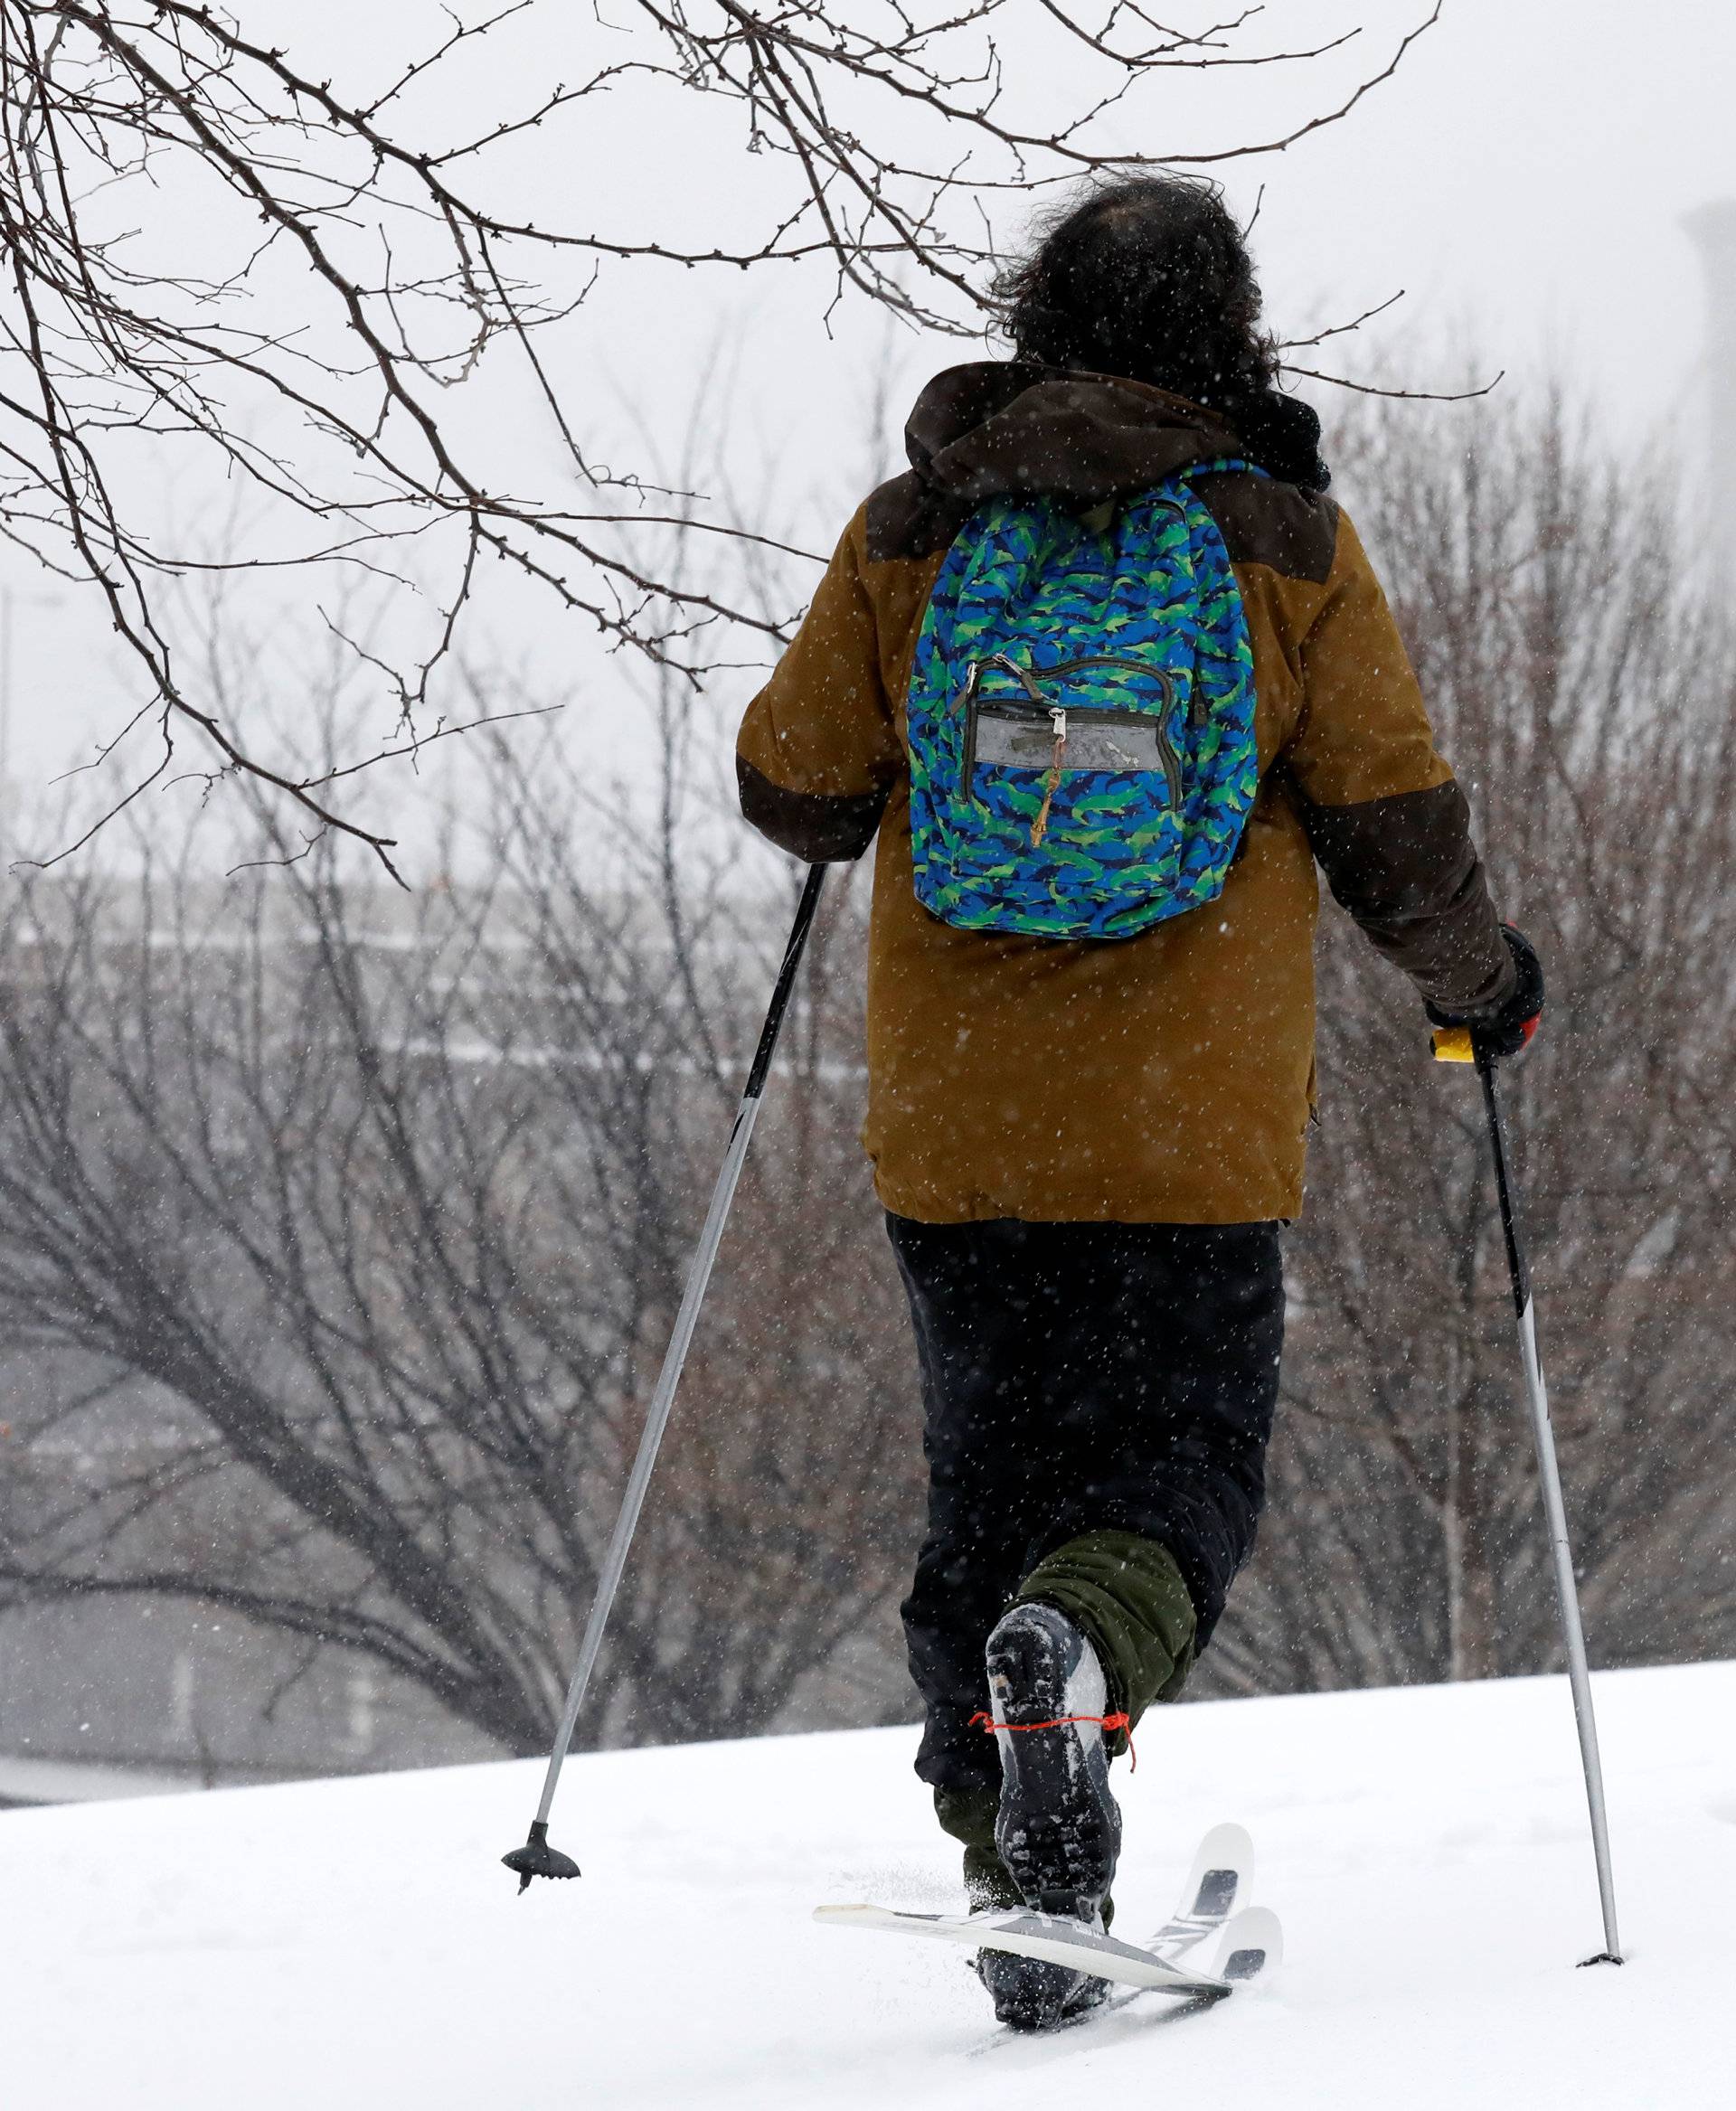 A man skis during a snow storm in the Brooklyn borough of New York